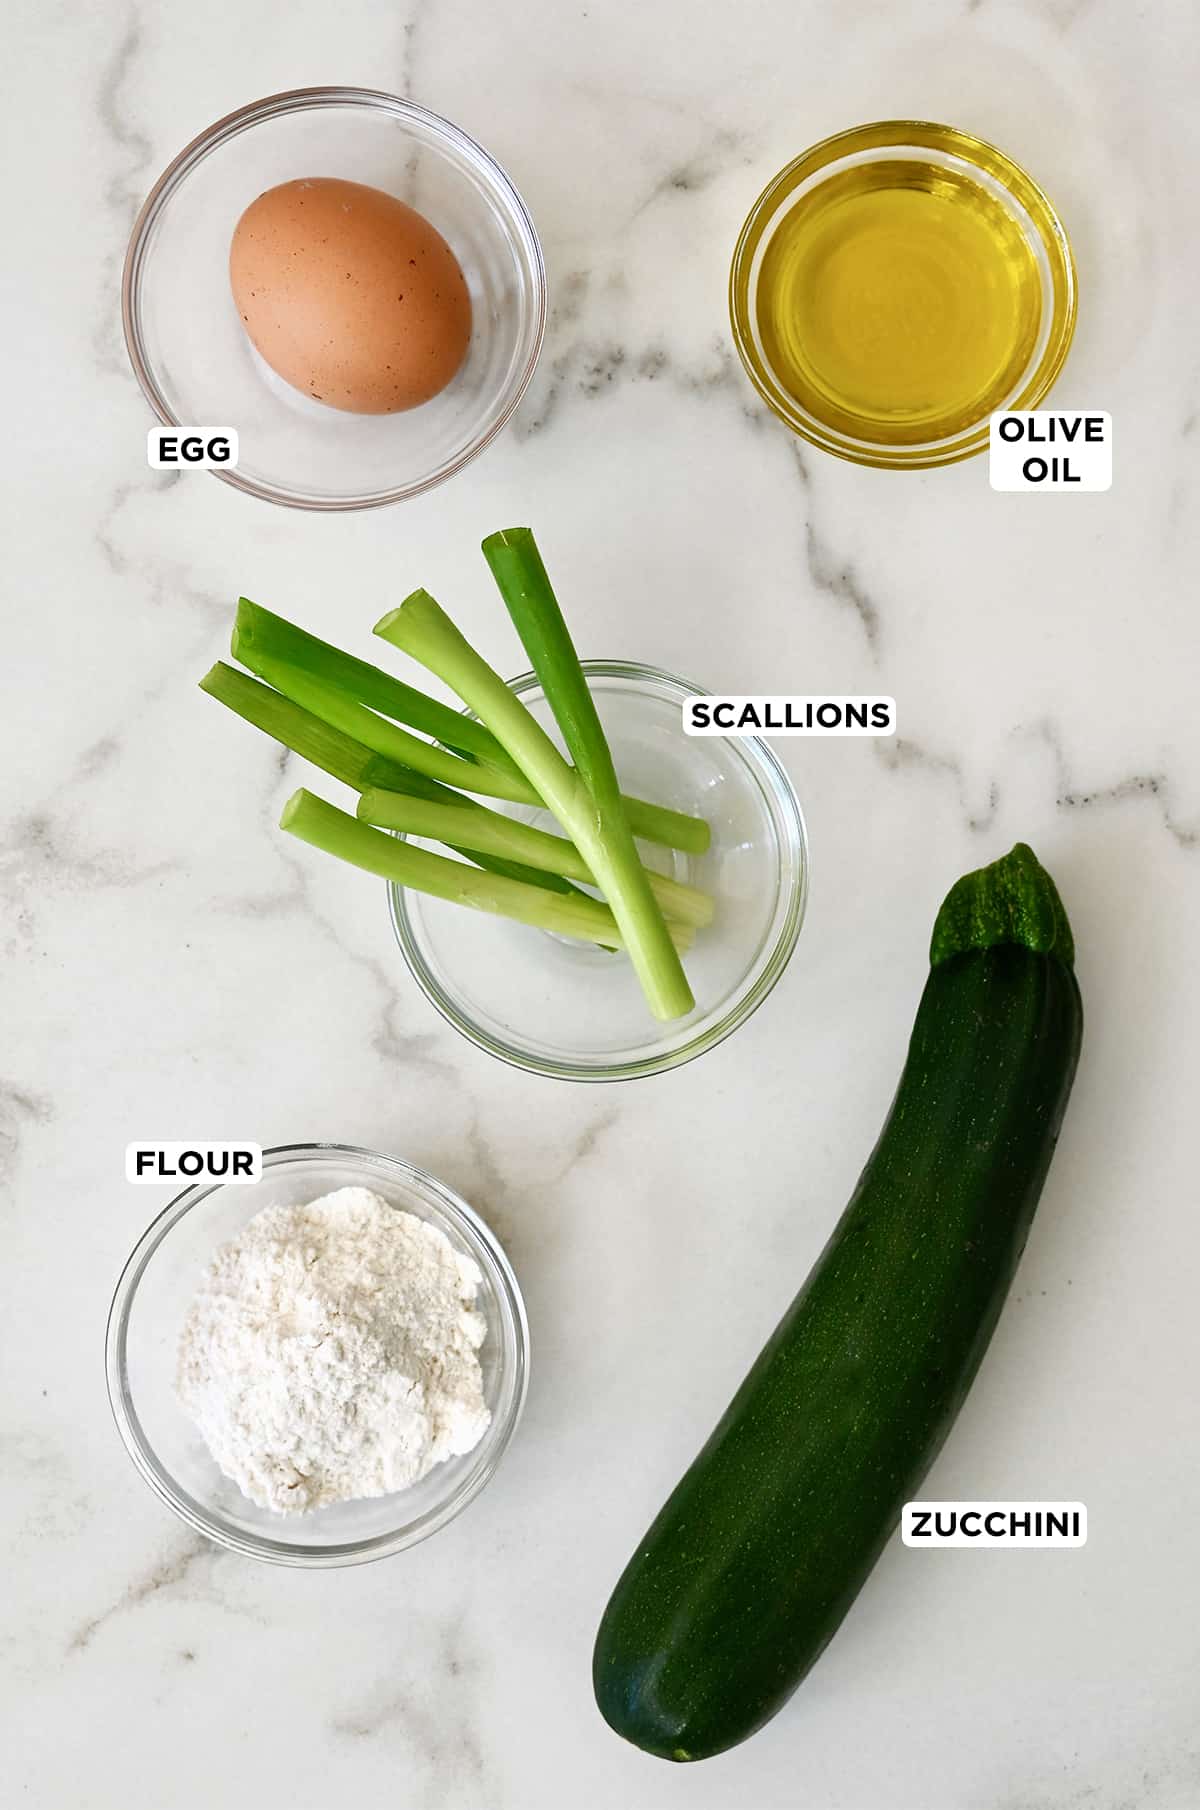 A large zucchini next to clear bowls containing an egg, olive oil, scallions and flour.